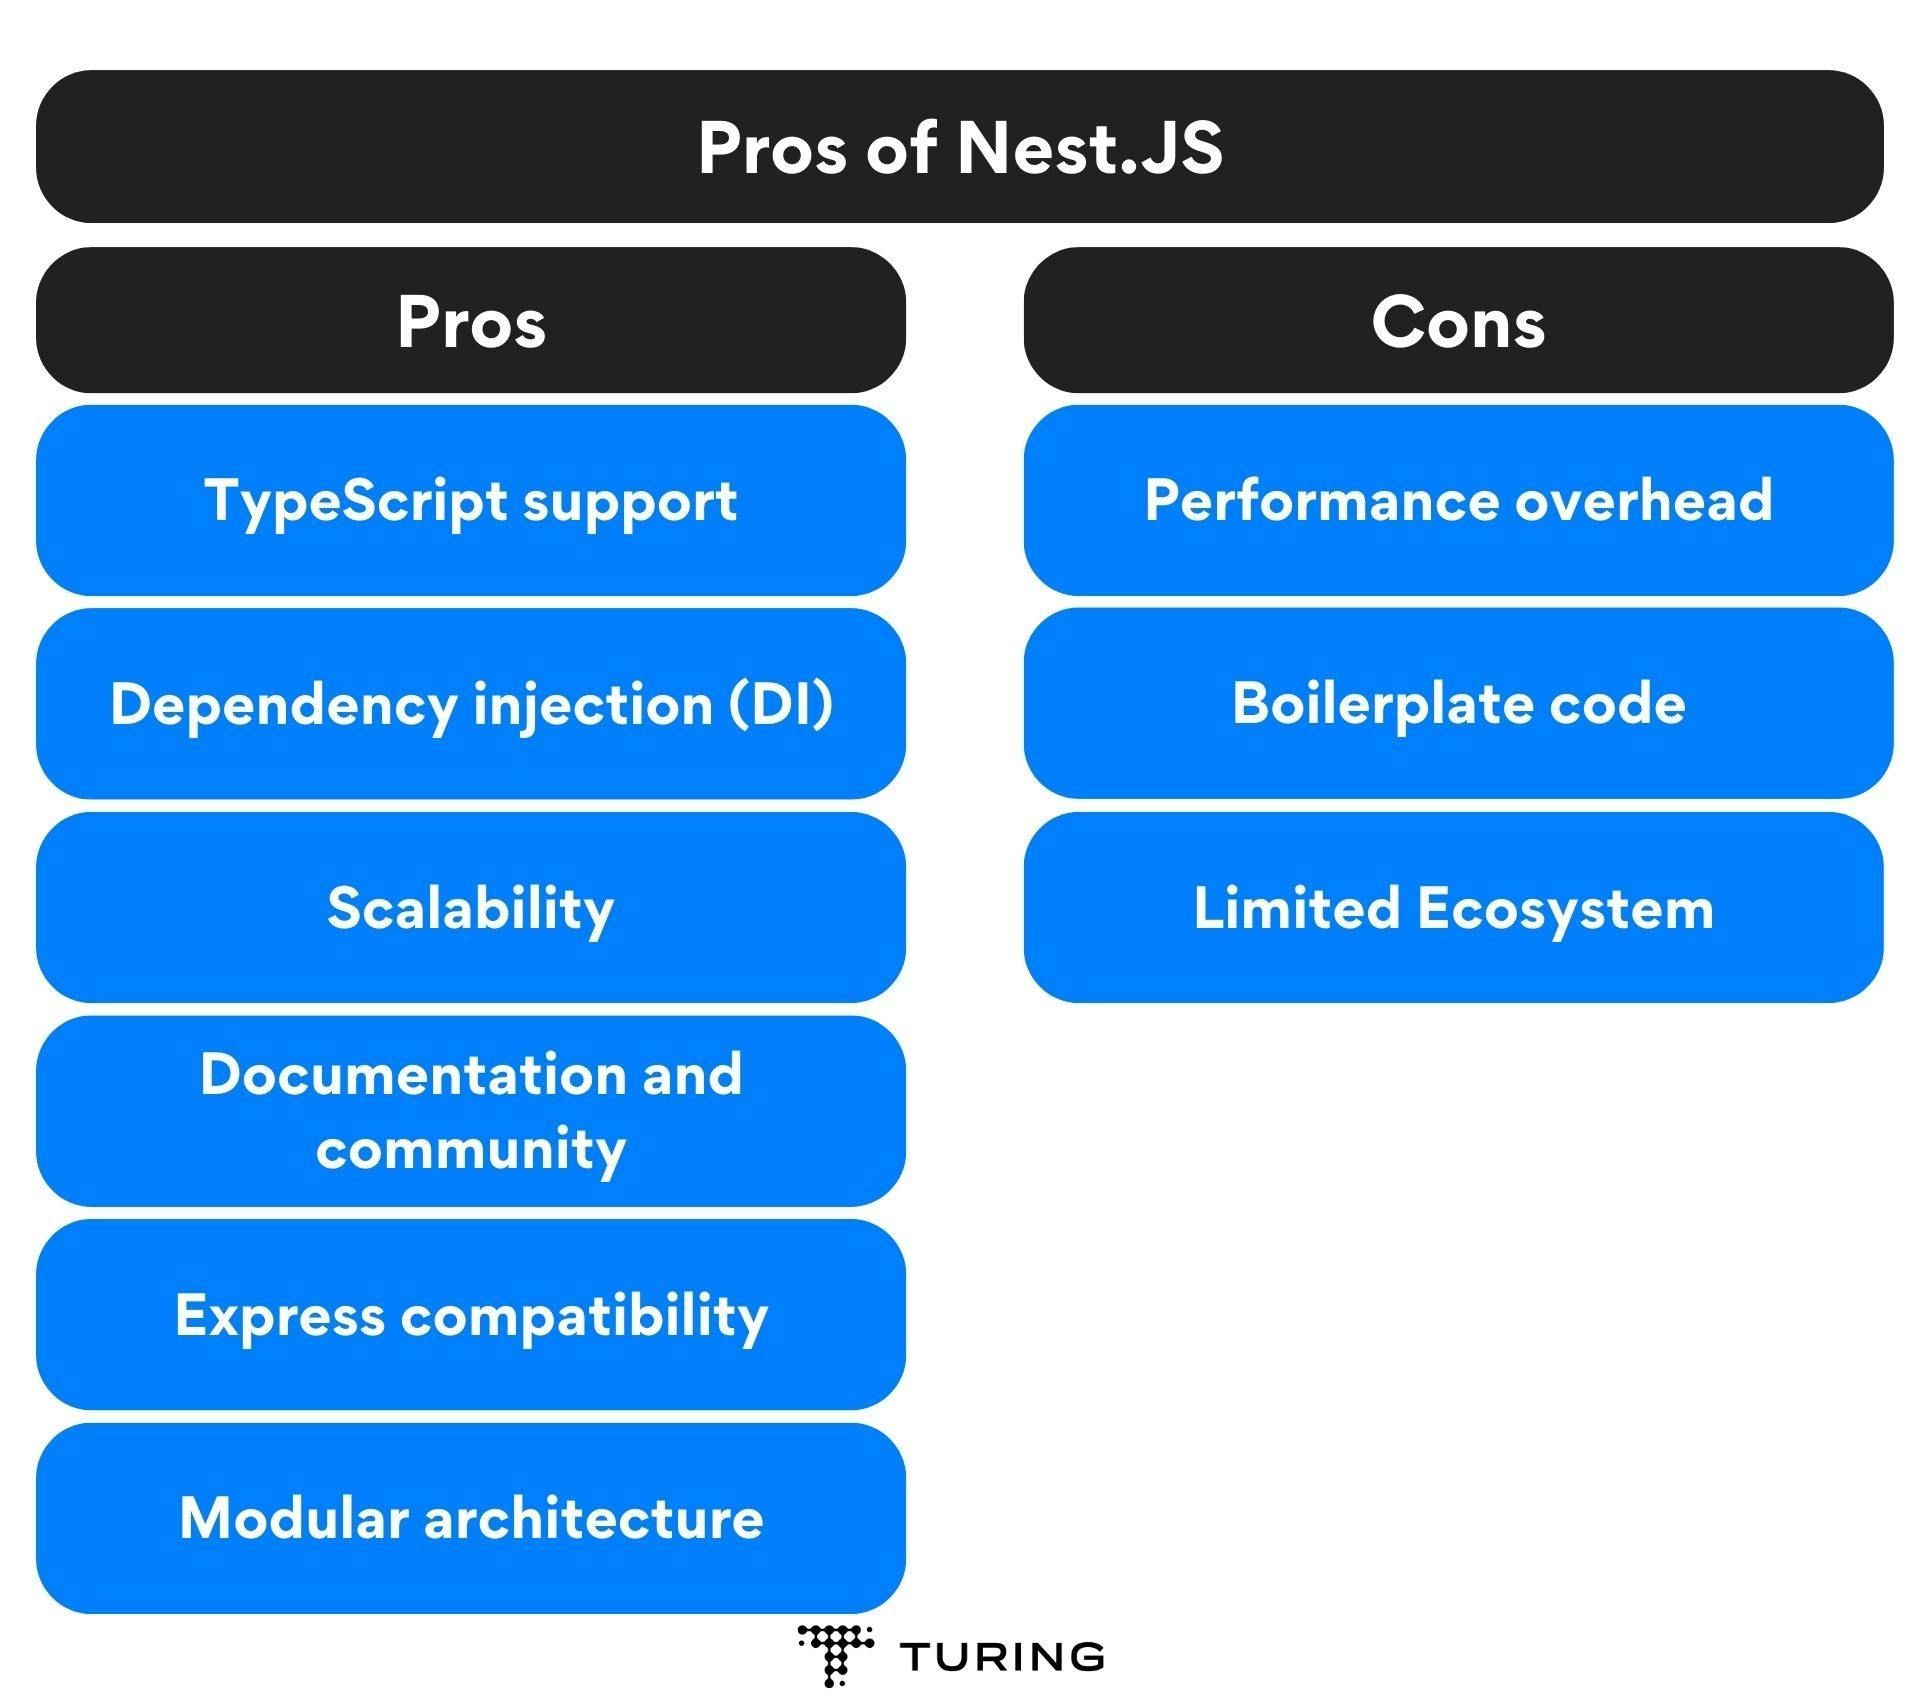 Pros and Cons of Nest.JS